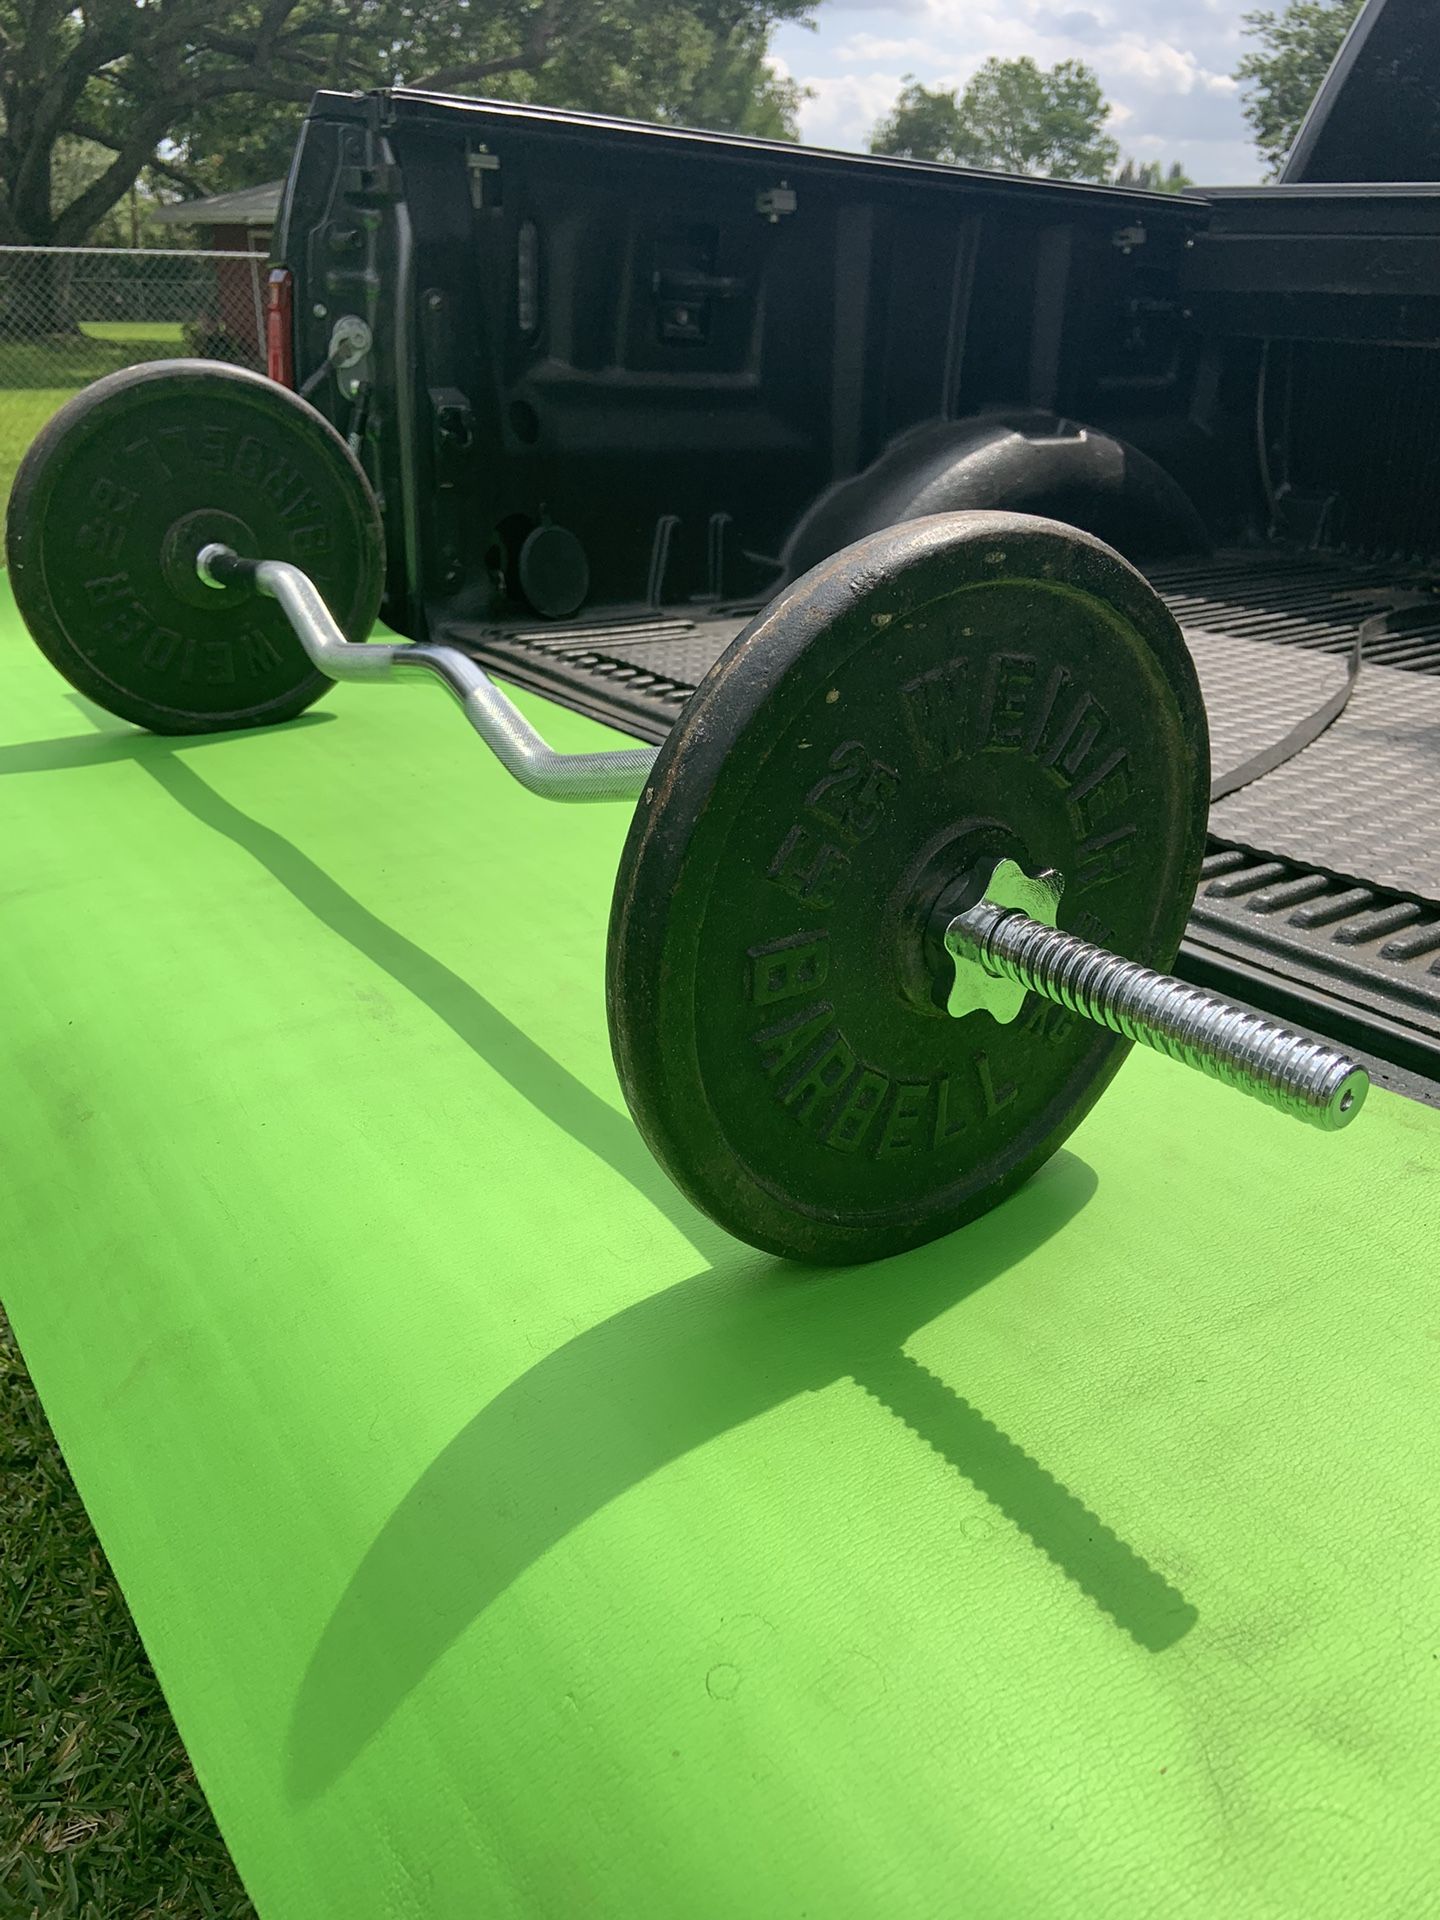 Like New Standard Curl Bar With 50 Pounds in Plates 